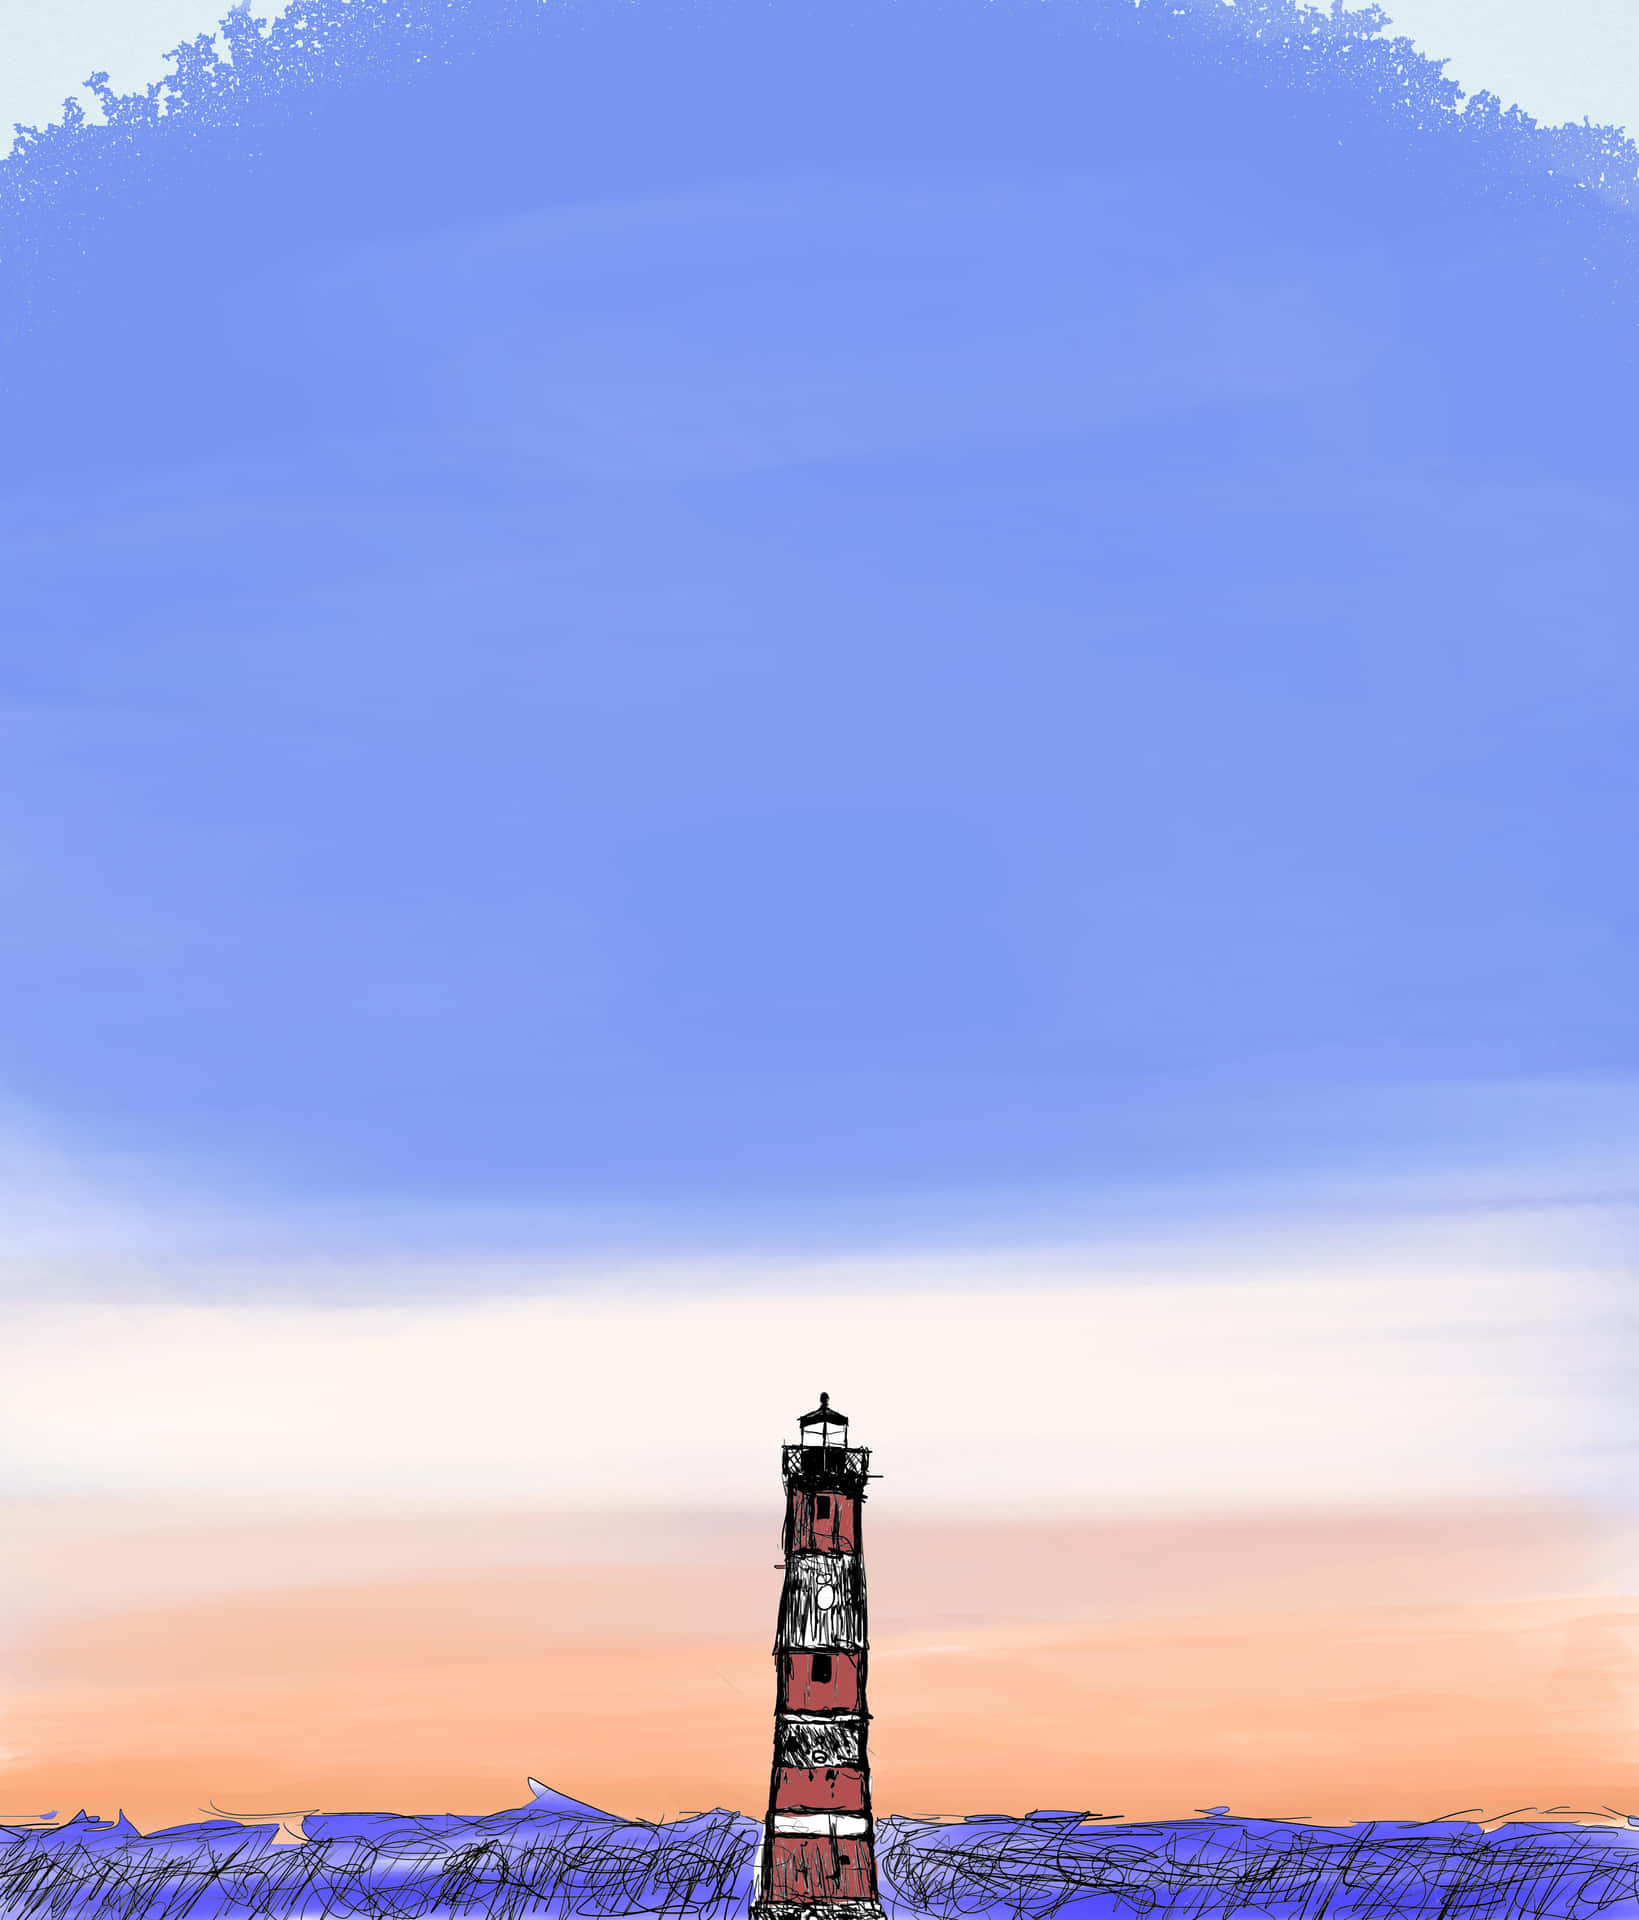 "Boating By a Lighthouse at Sunrise"